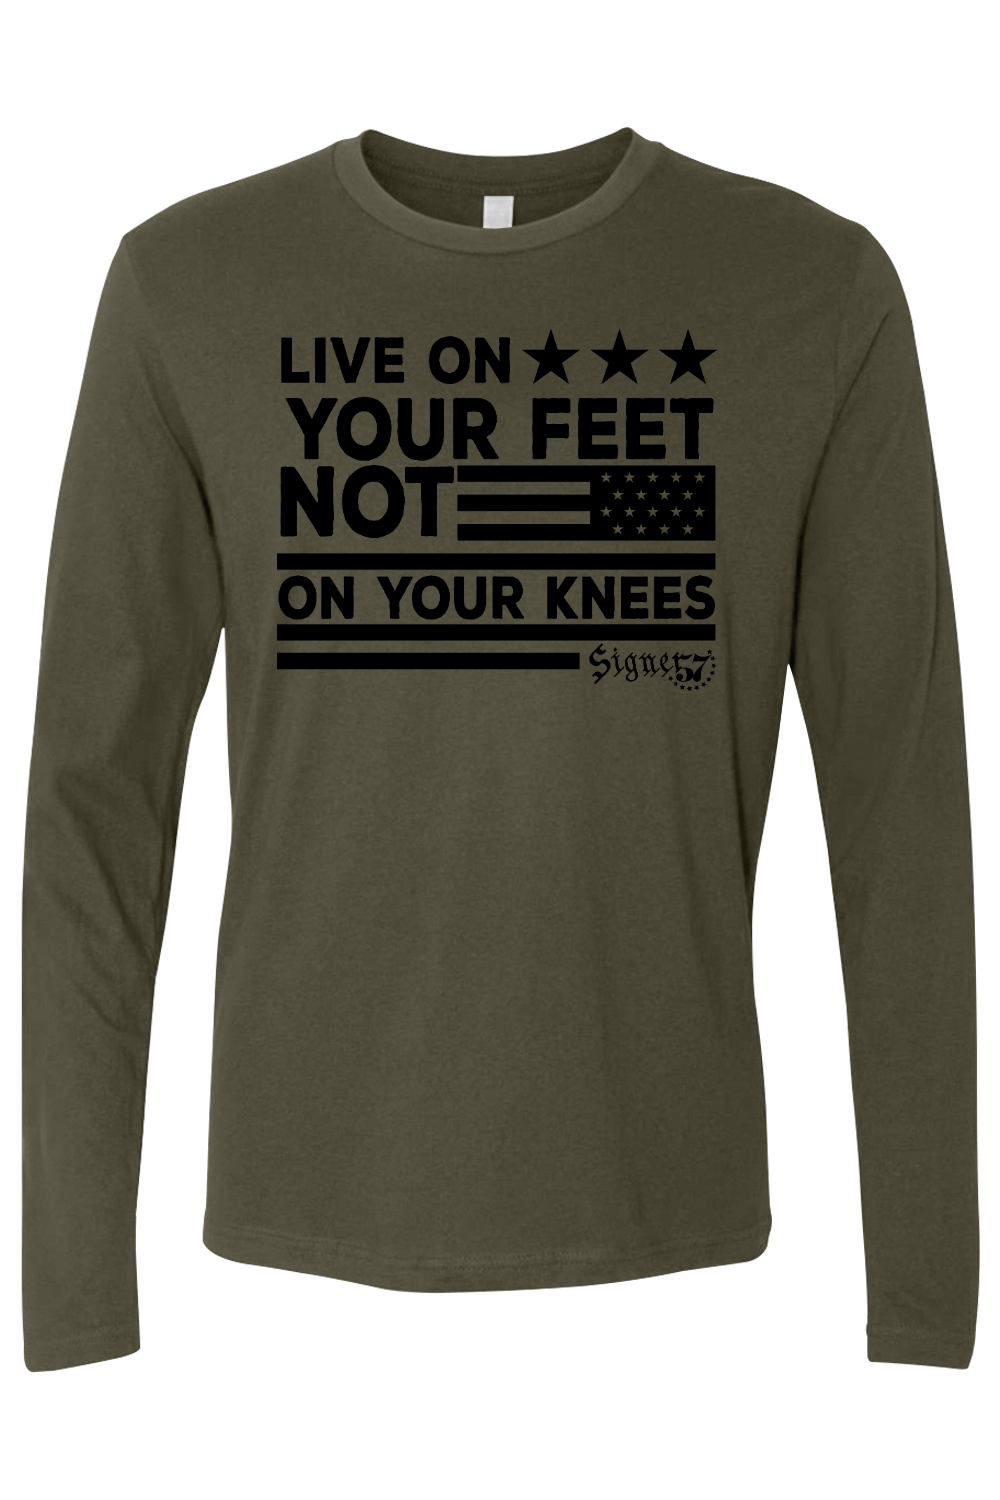 UNISEX Long Sleeve Shirt - Live On Your Feet Not On Your Knees